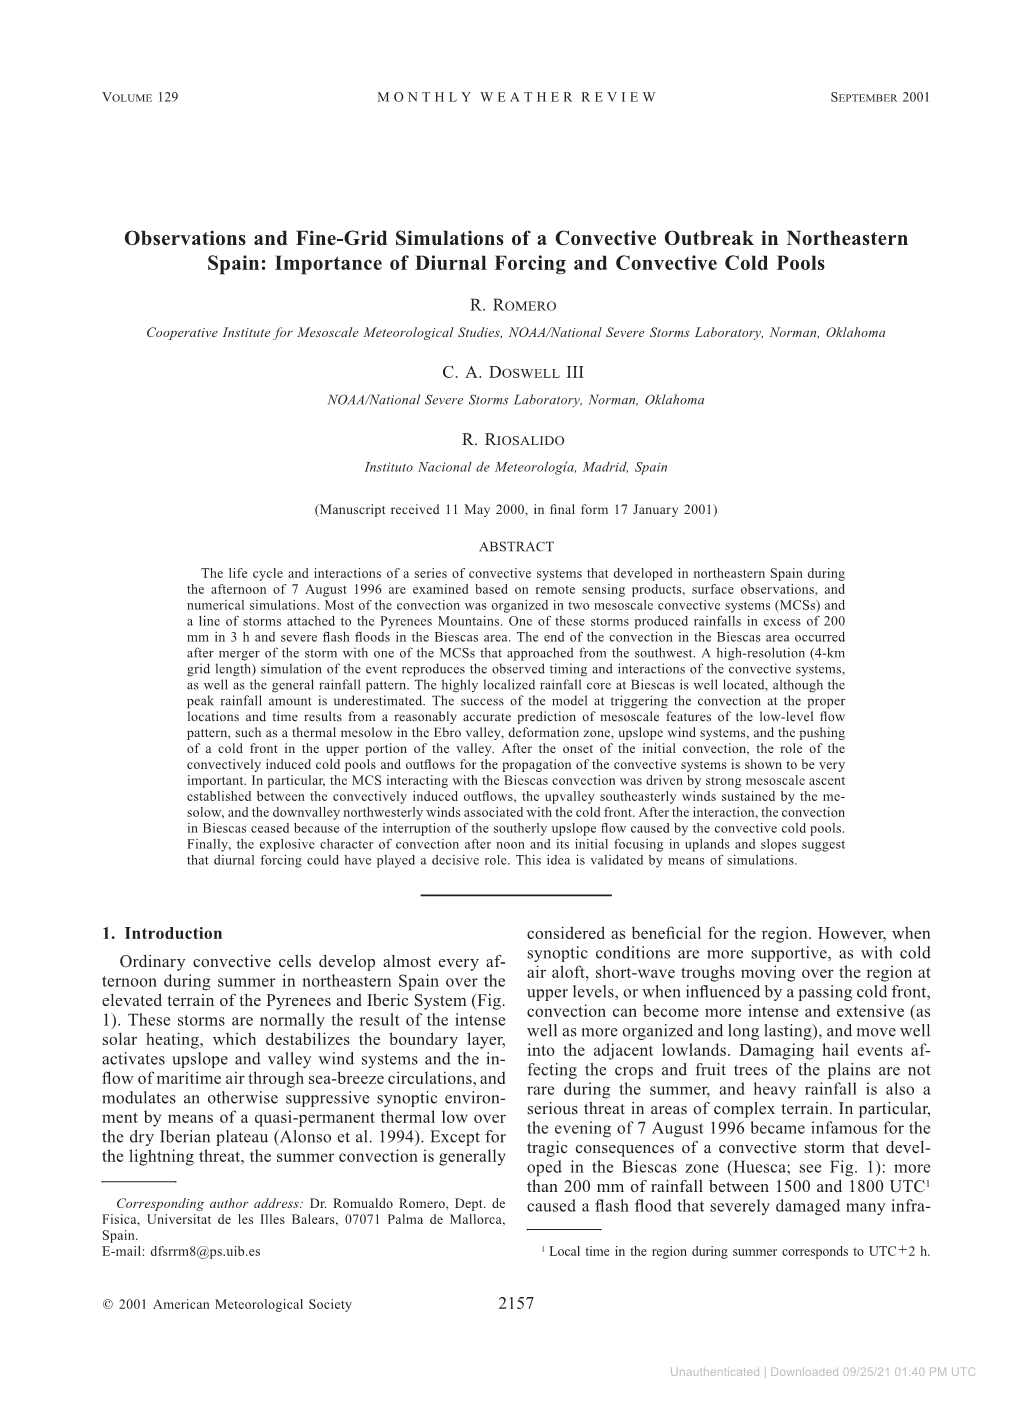 Observations and Fine-Grid Simulations of a Convective Outbreak in Northeastern Spain: Importance of Diurnal Forcing and Convective Cold Pools